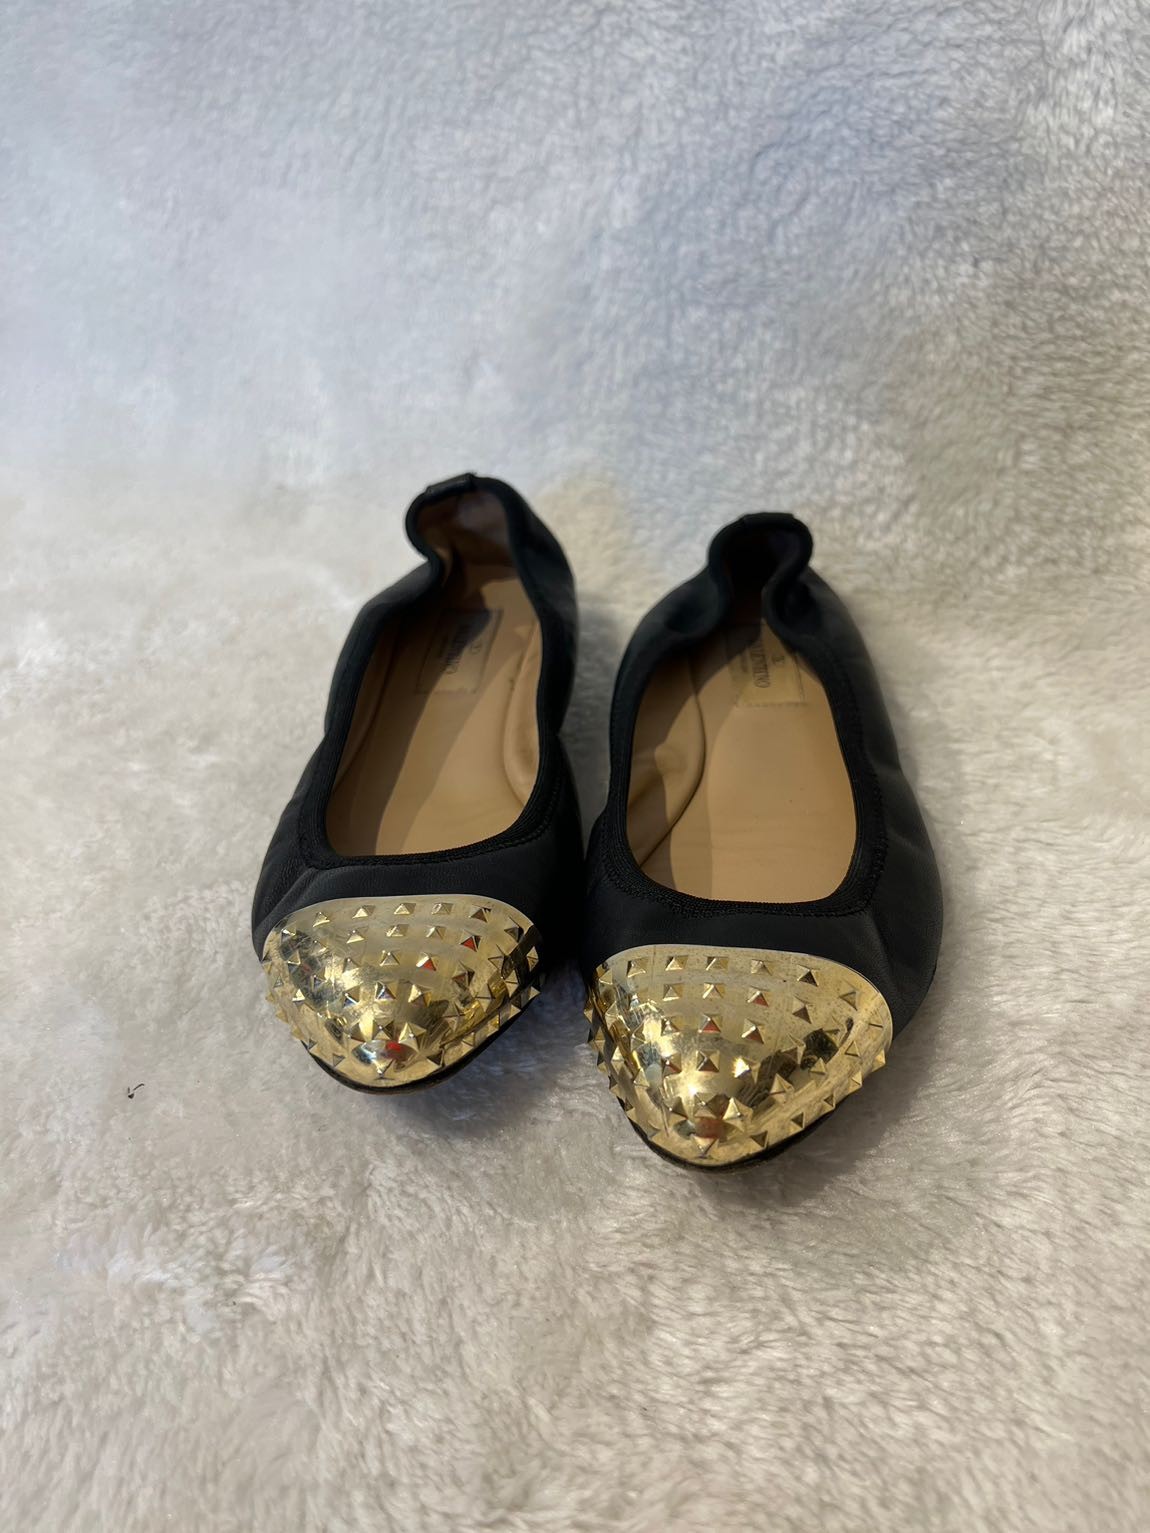 MISSING VALENTINO BABETTE SHOES